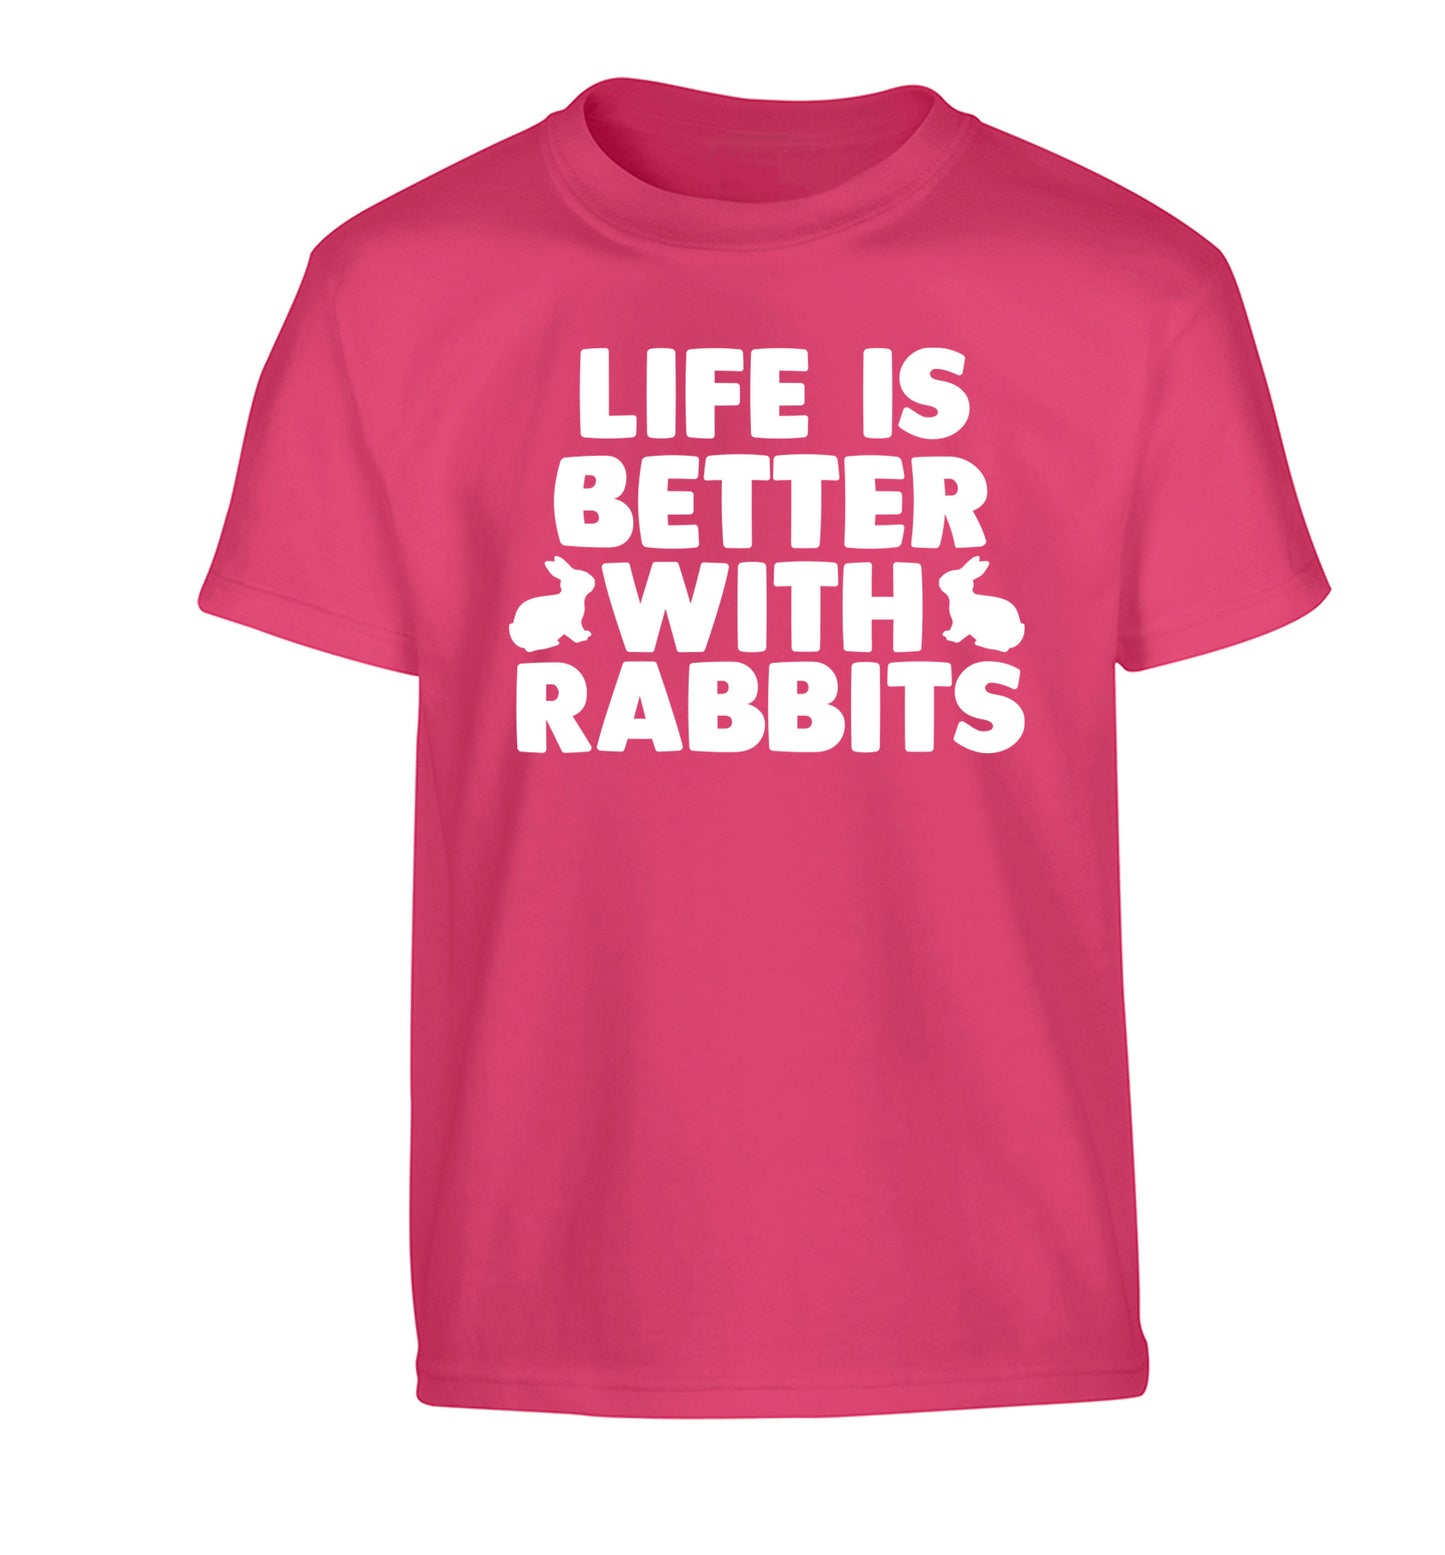 Life is better with rabbits Children's pink Tshirt 12-14 Years